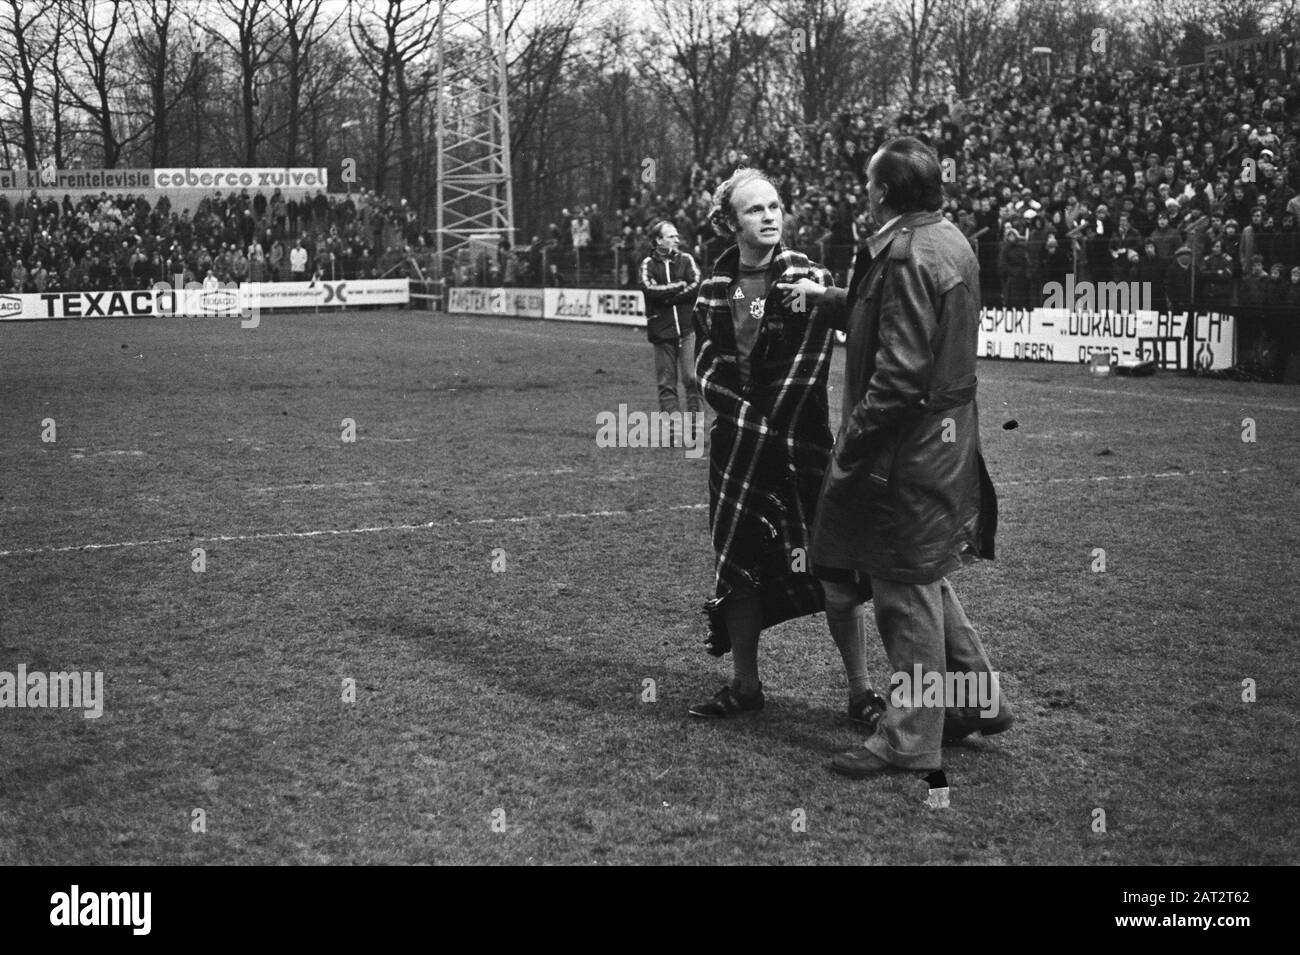 County against Ajax 0-0; match was stopped for a moment, during this small break: Ruud Geels in conversation with Bobby Haarms Date: January 9, 1977 Keywords: CONTATIONS, sports, soccer, etc. matches Personal name: Bobby Haarms, Geels, Ruud Stock Photo